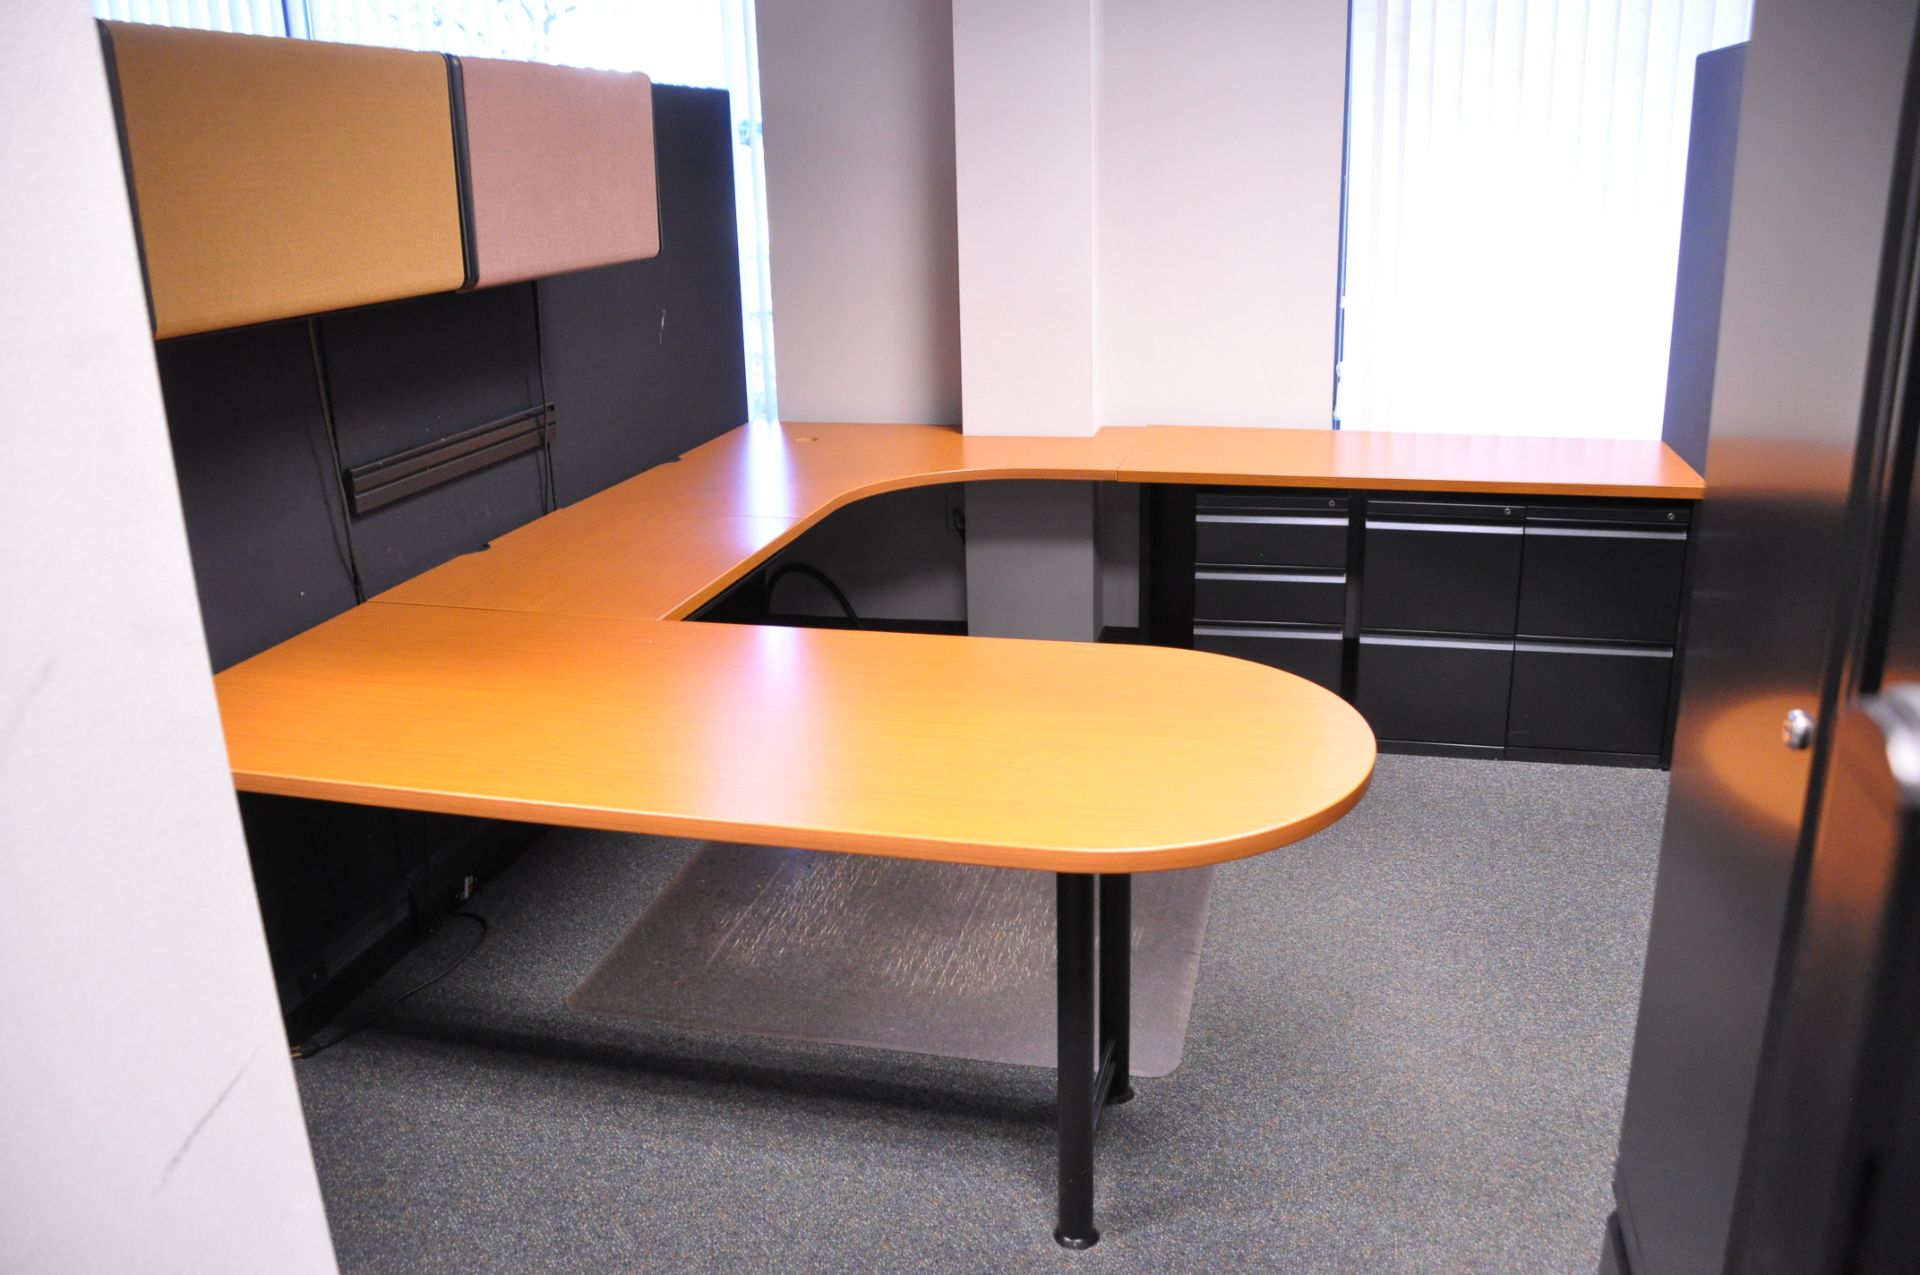 Lot-(1) Herman Miller 8-Station Cubicle Partition Work System with Standing Cabinets and Partition - Image 5 of 15